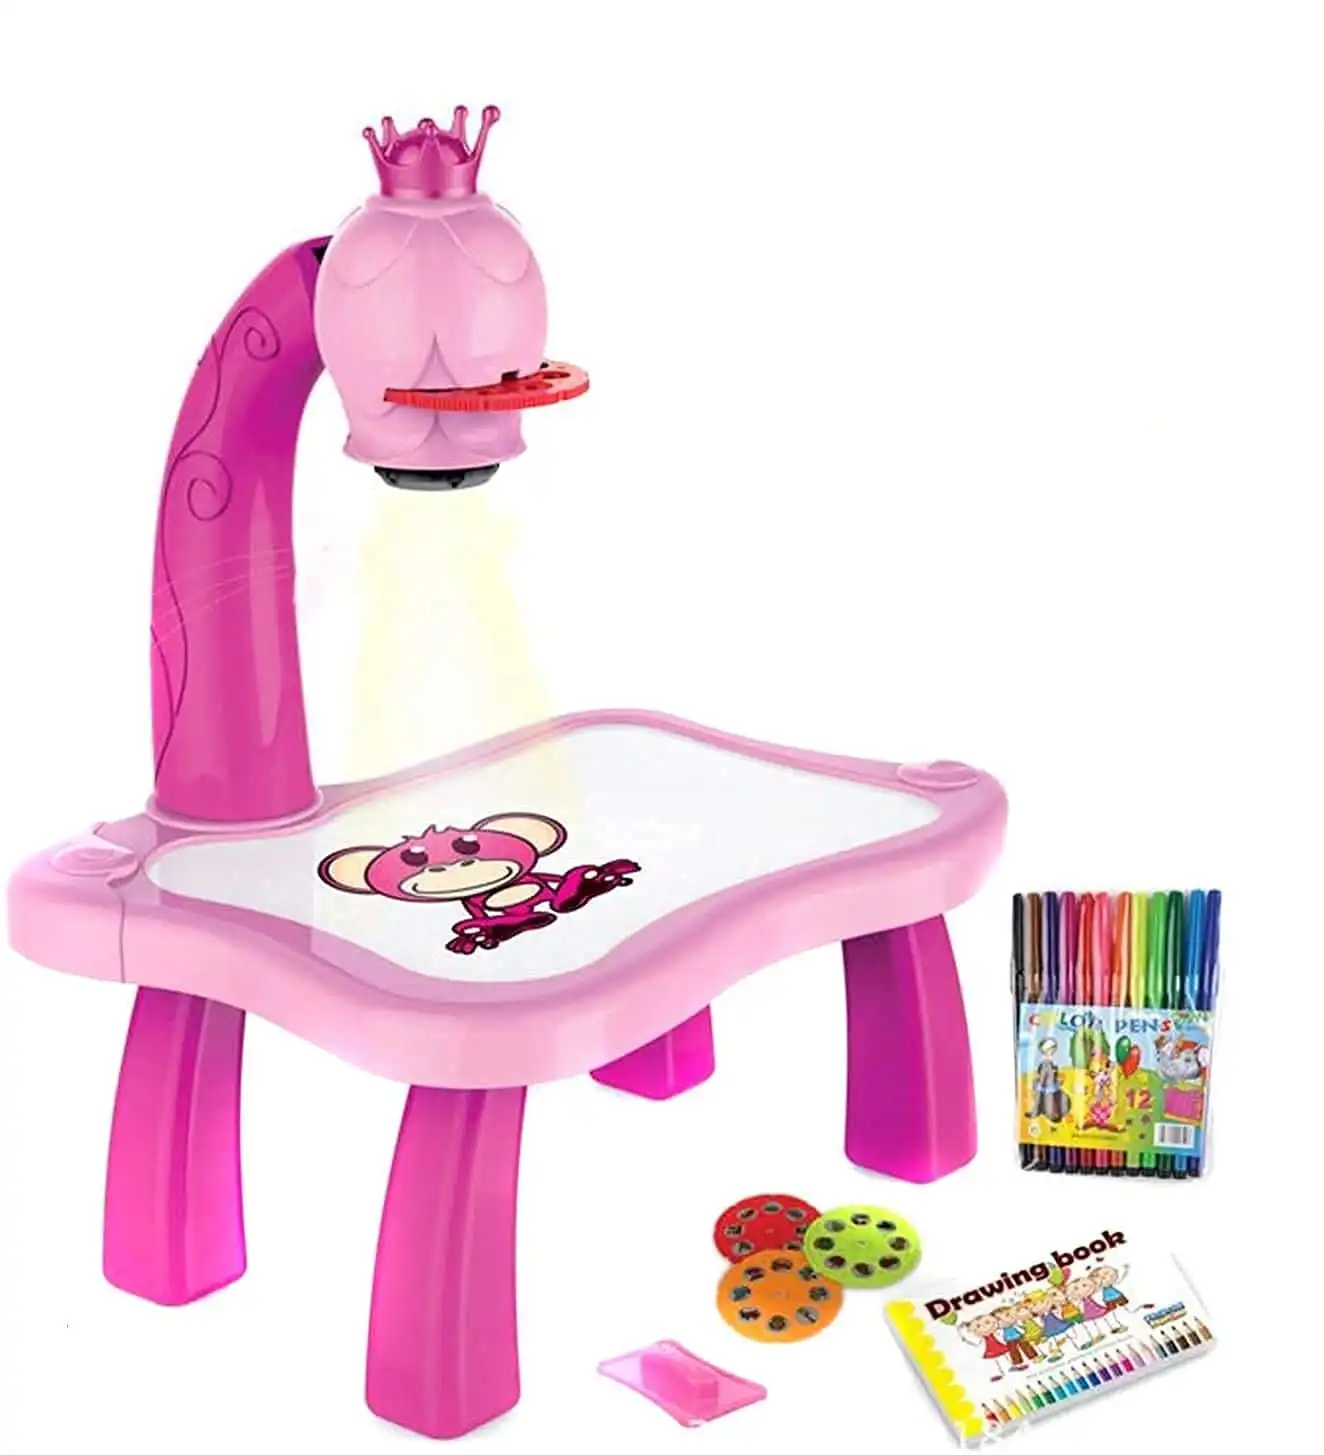 Children's LED Projection Painting Board Table Set